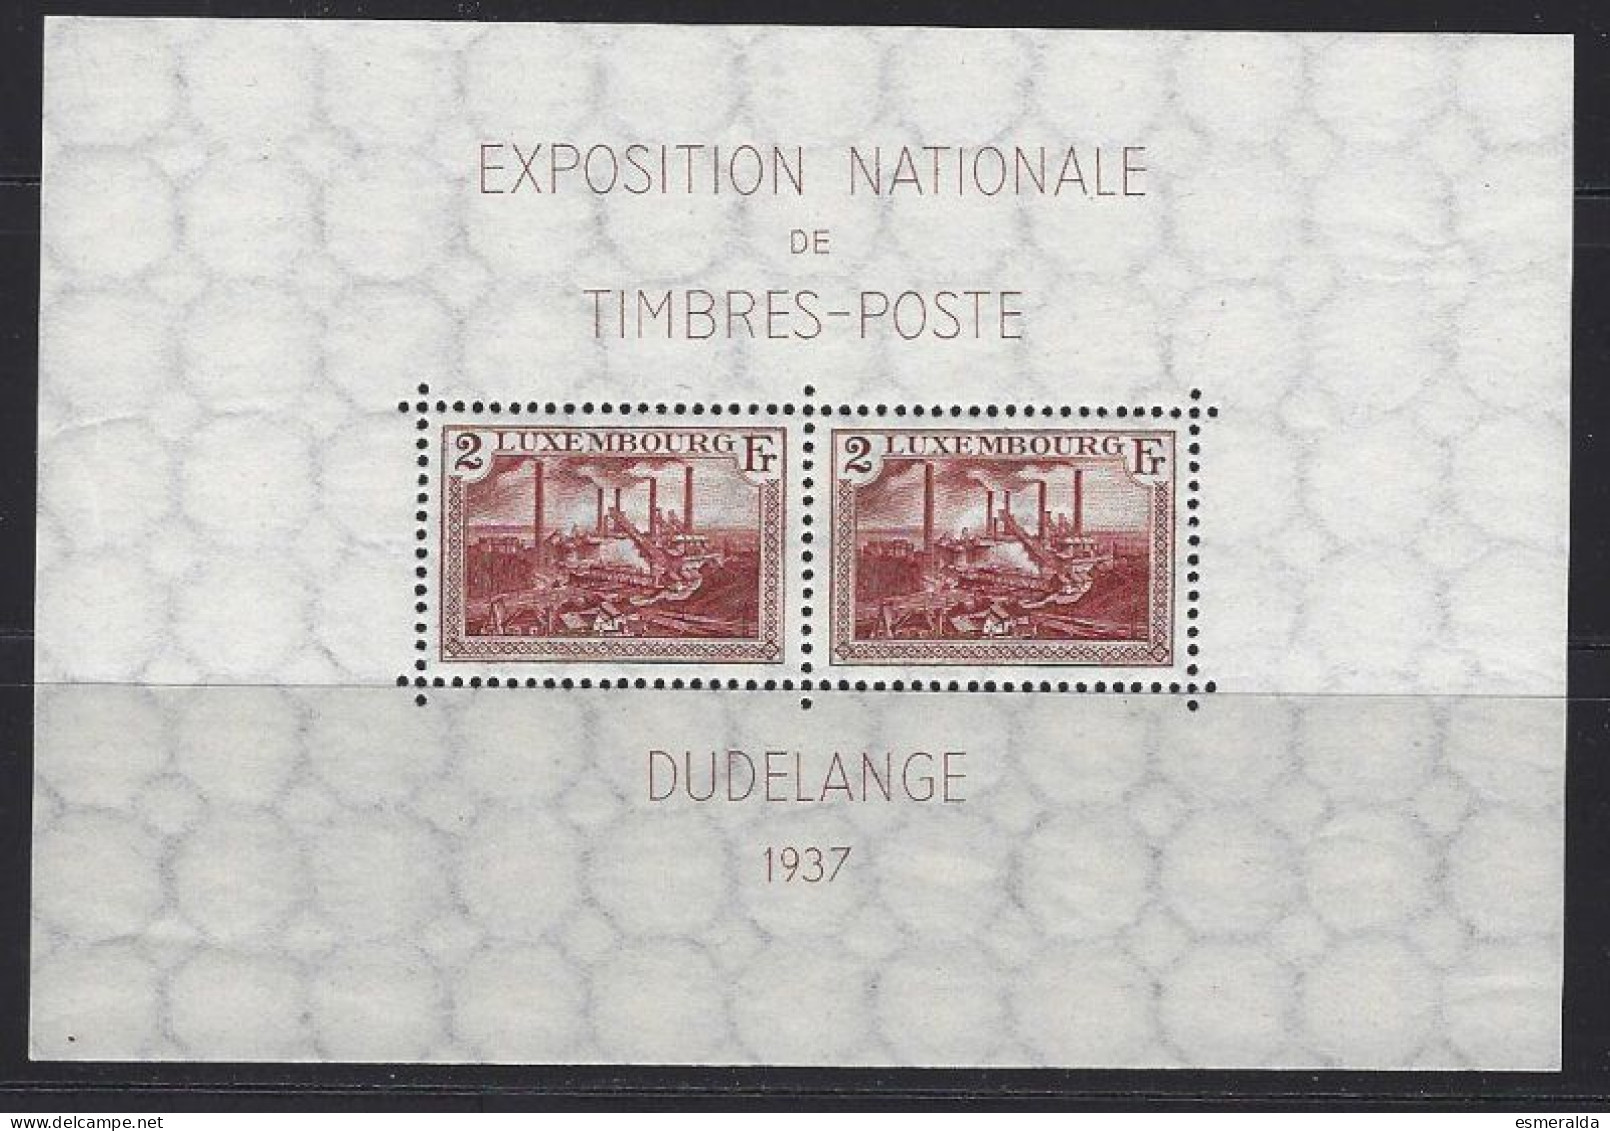 Luxembourg Yv BF 2 Exposition Nationale De Timbre Poste Dudelange 1937 **/mnh - Blocks & Sheetlets & Panes